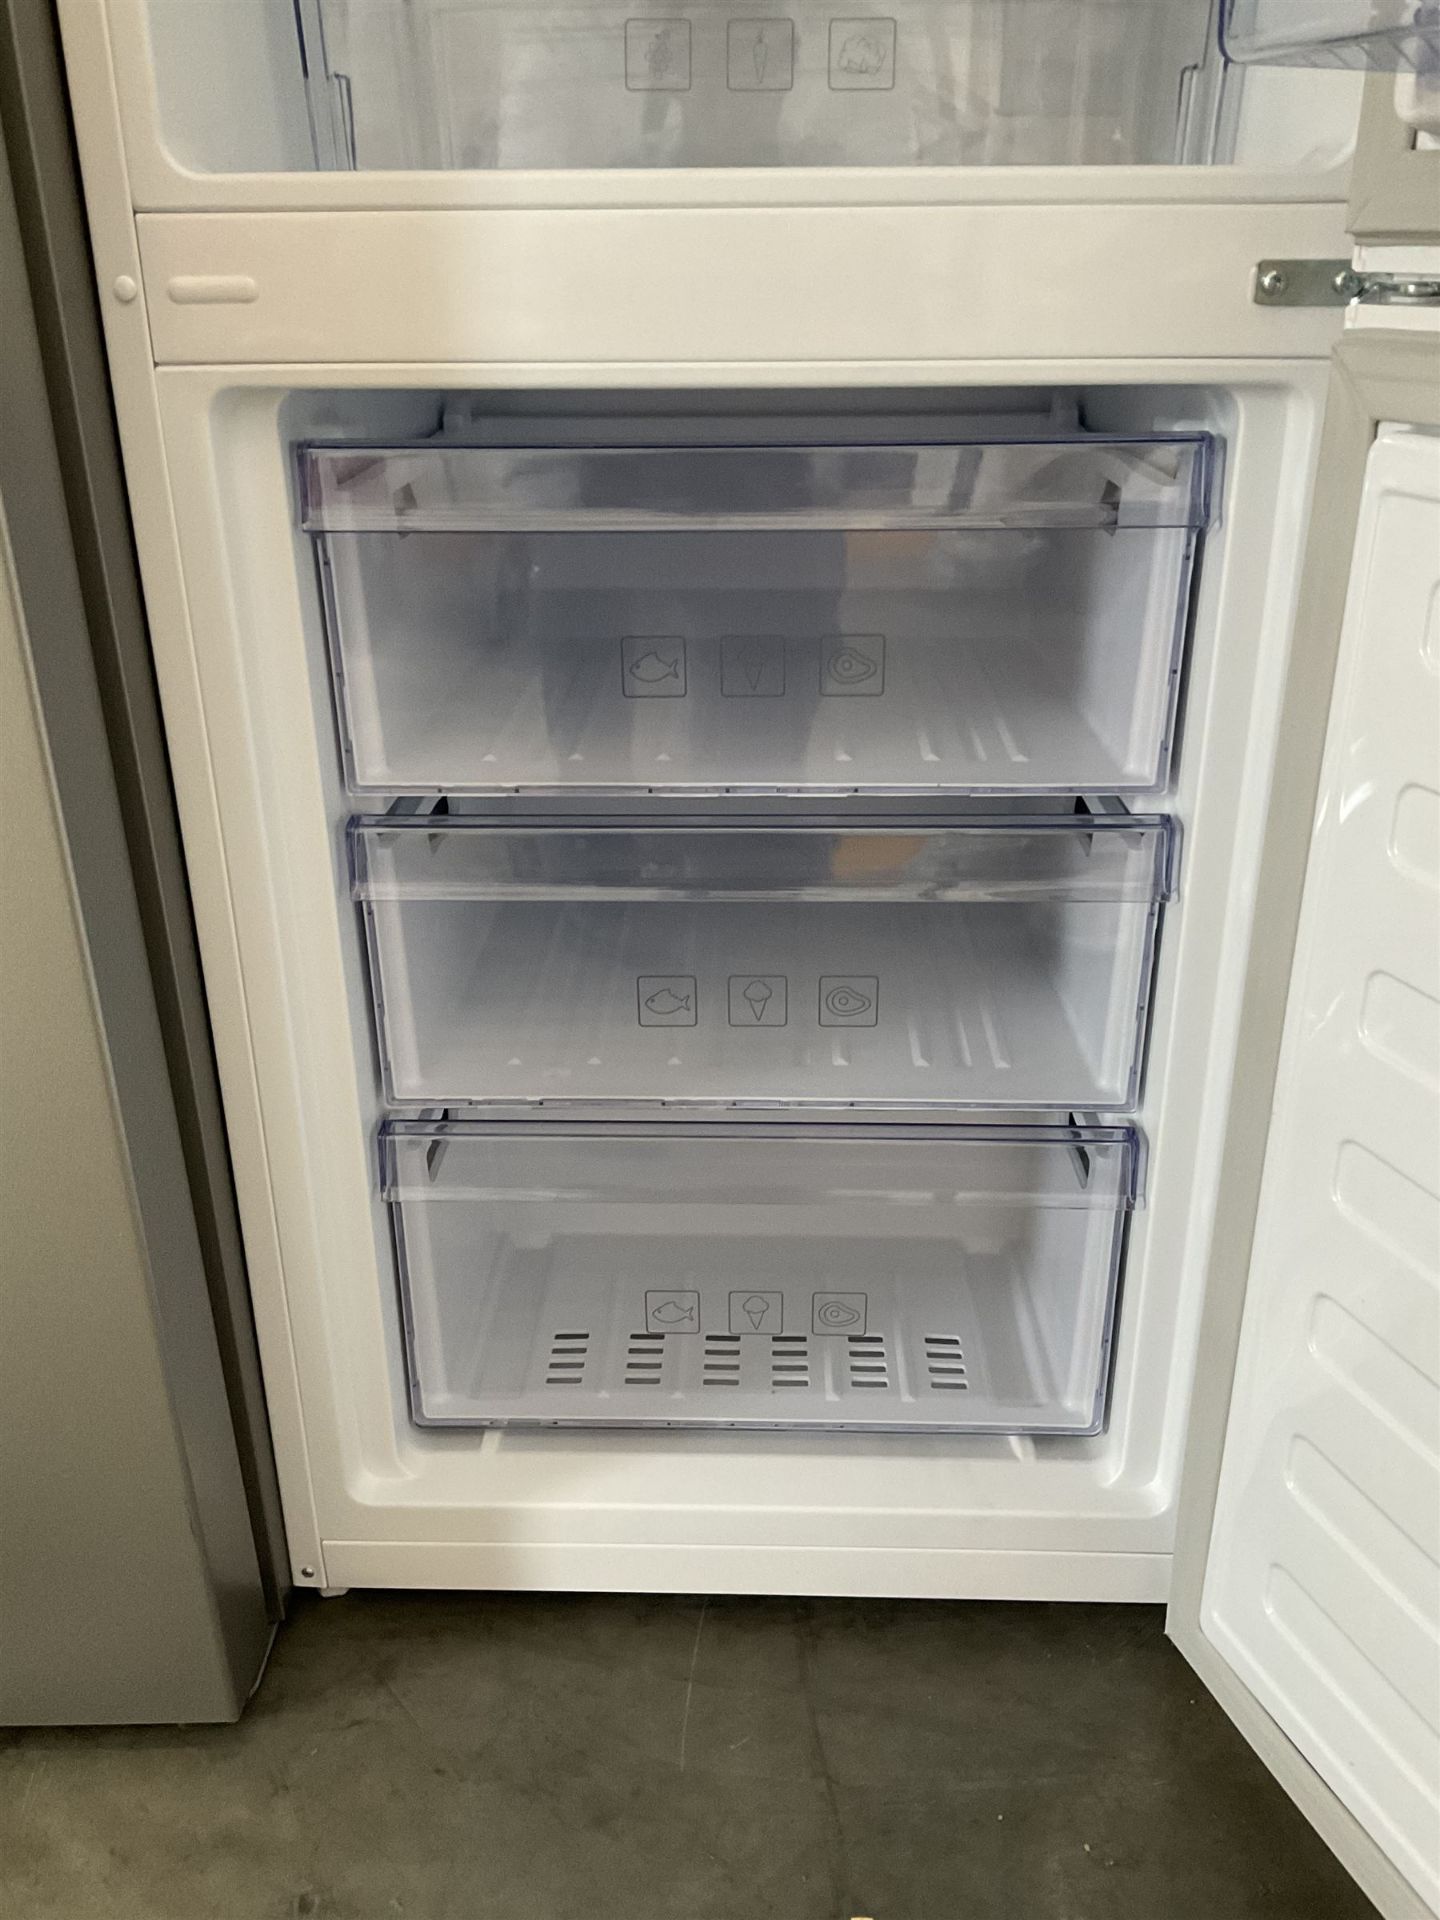 Beko CSG3571W fridge freezer - THIS LOT IS TO BE COLLECTED BY APPOINTMENT FROM DUGGLEBY STORAGE